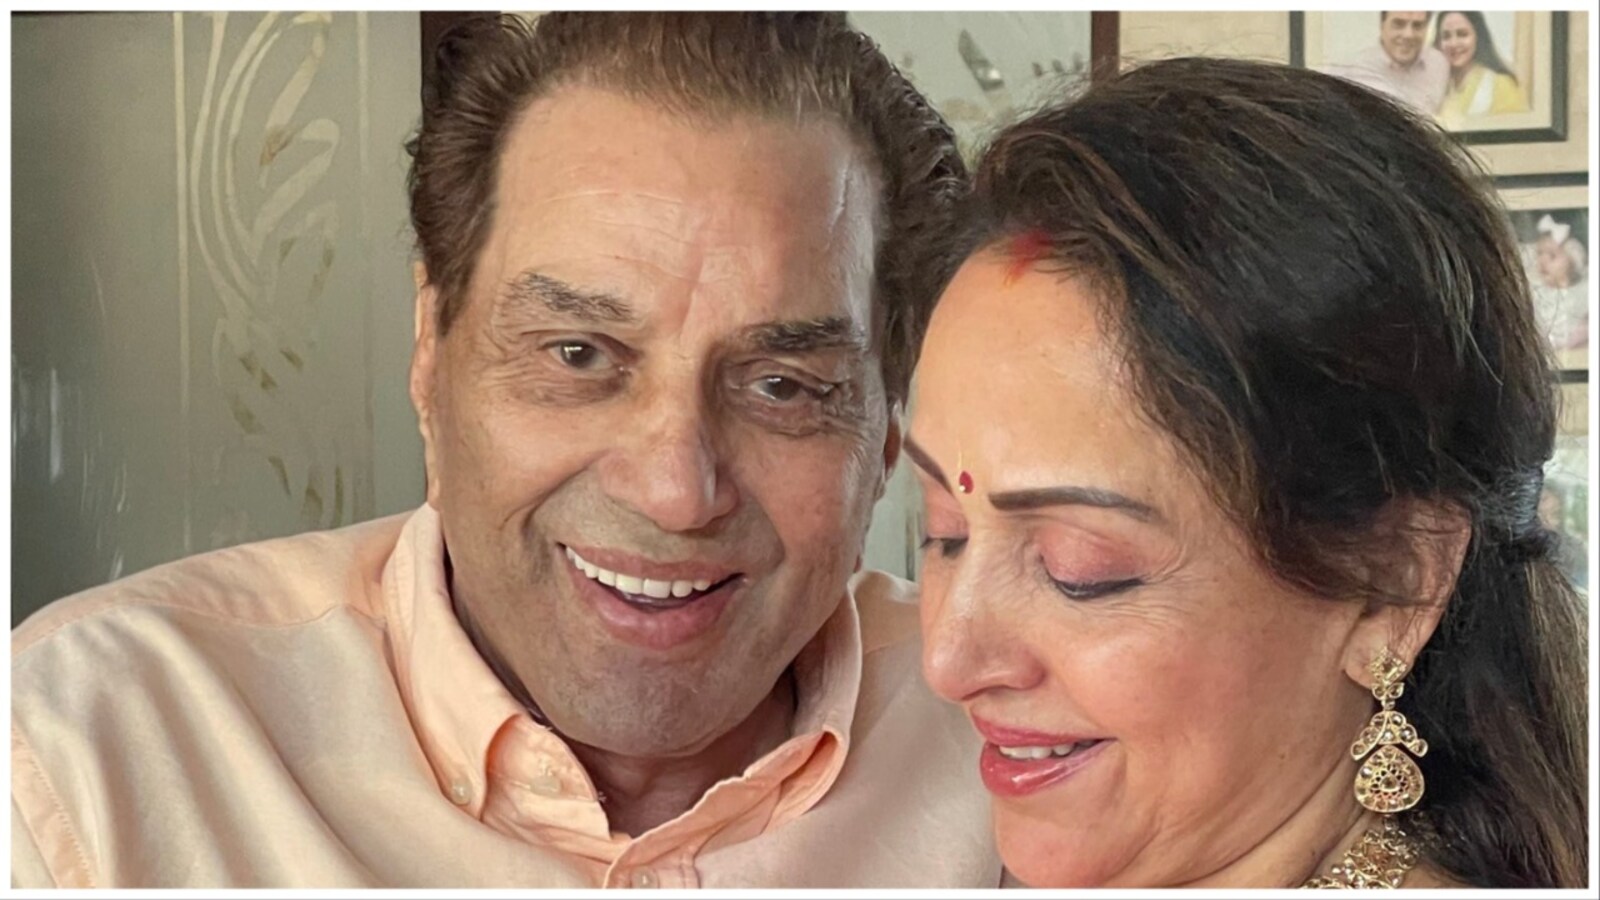 Hema Malini Sax Video - Hema Malini pens note on Dharmendra's birthday: 'Hope you can see how  special you are to me'